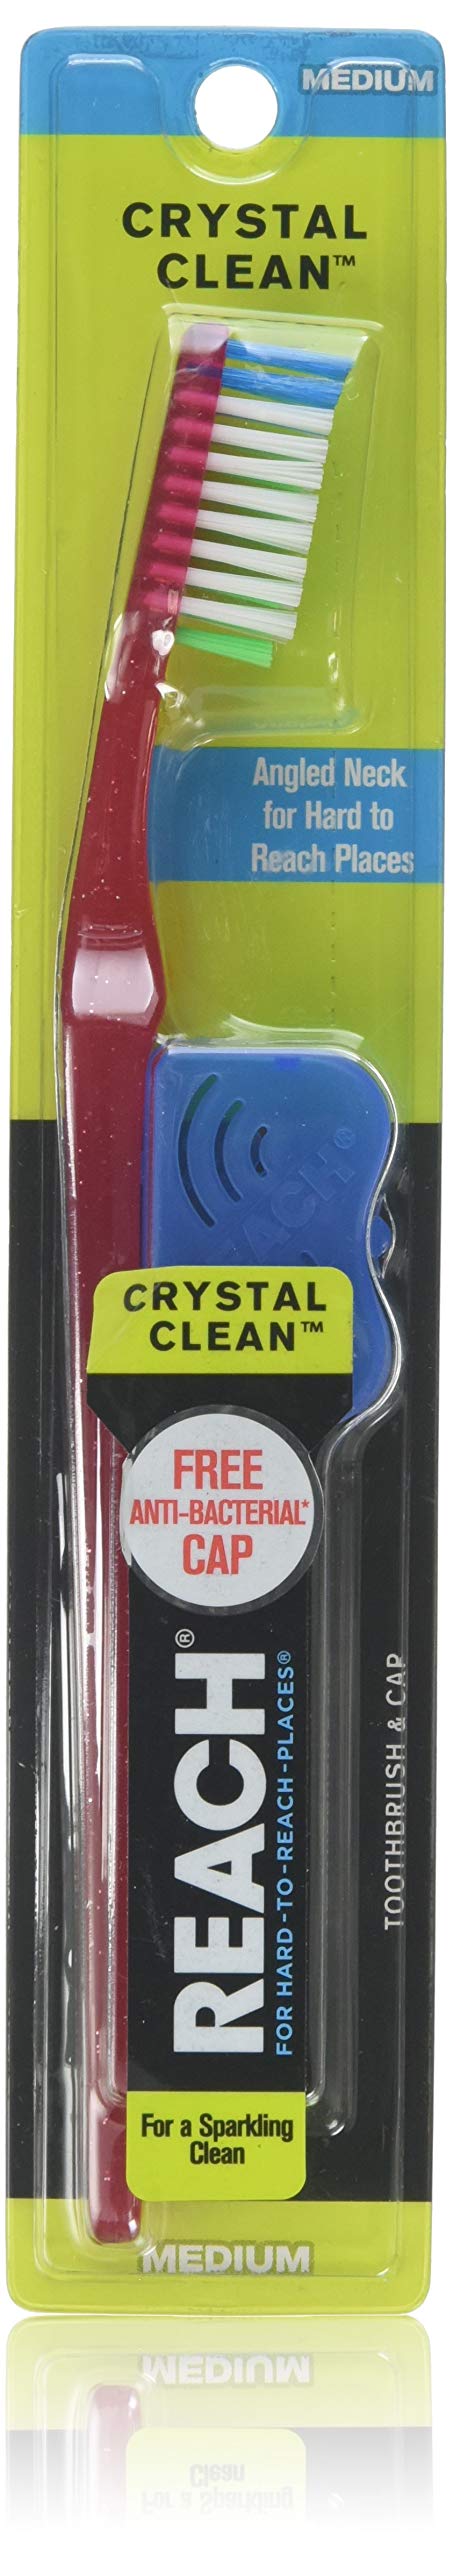 Reach Crystal Clean Medium Adult Toothbrush, 1 Each, Colors May Vary, 6 Piece by Reach